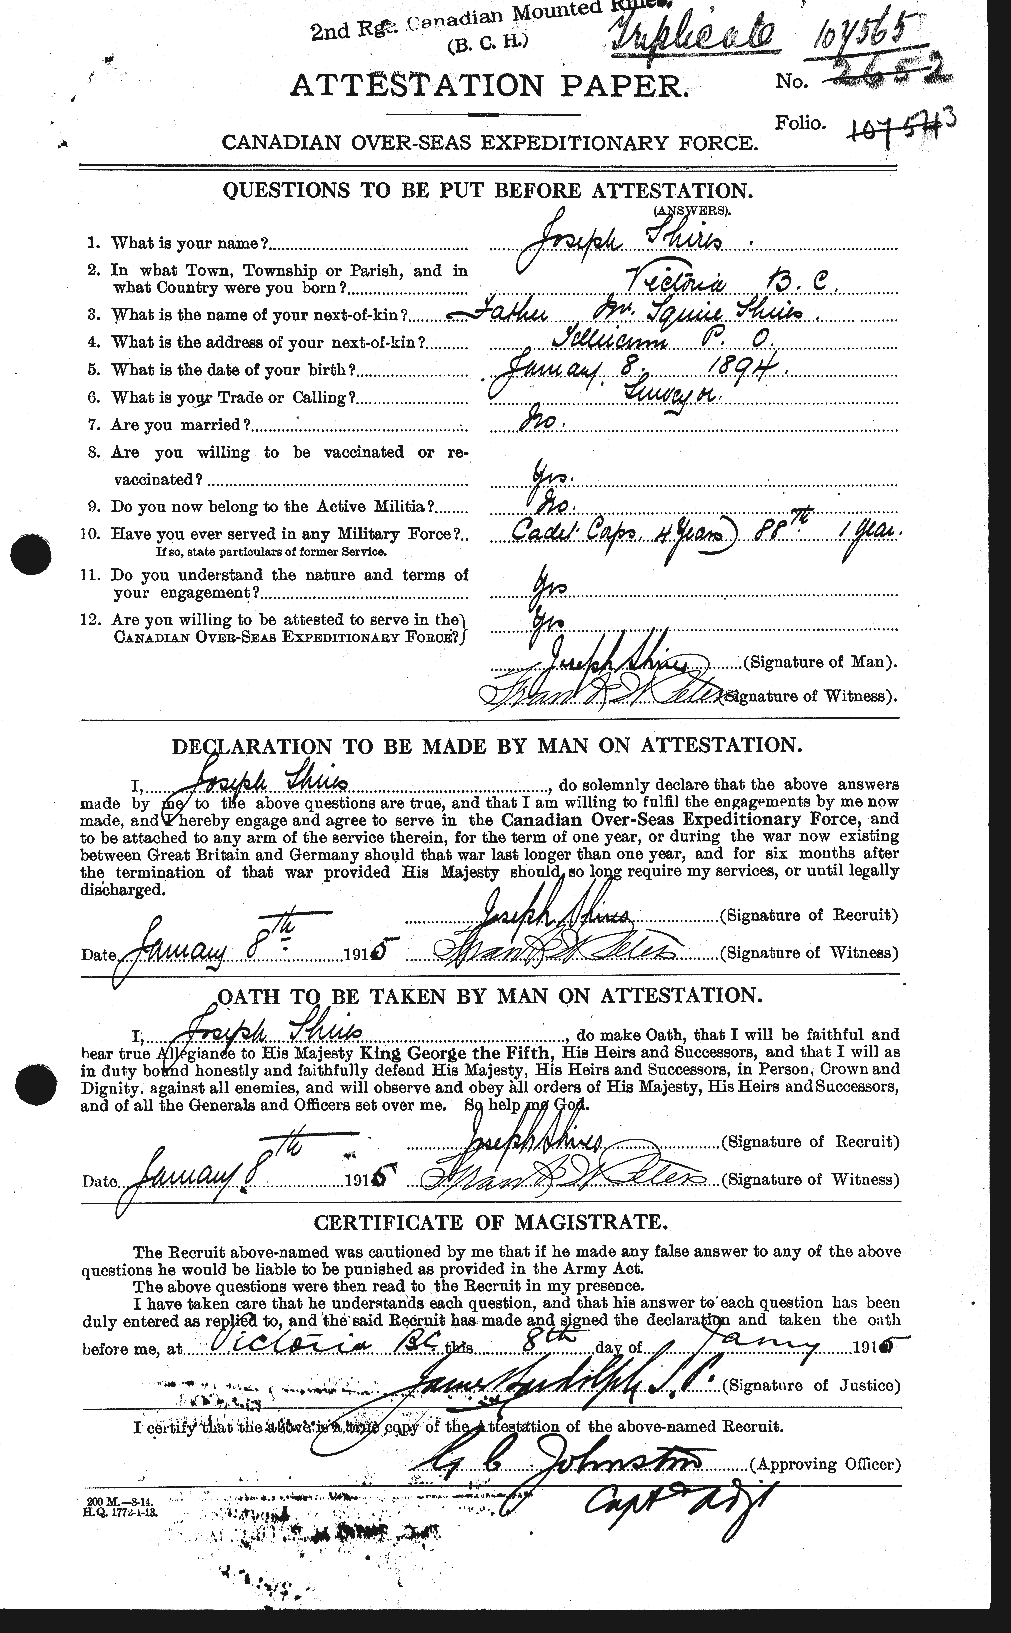 Personnel Records of the First World War - CEF 094815a